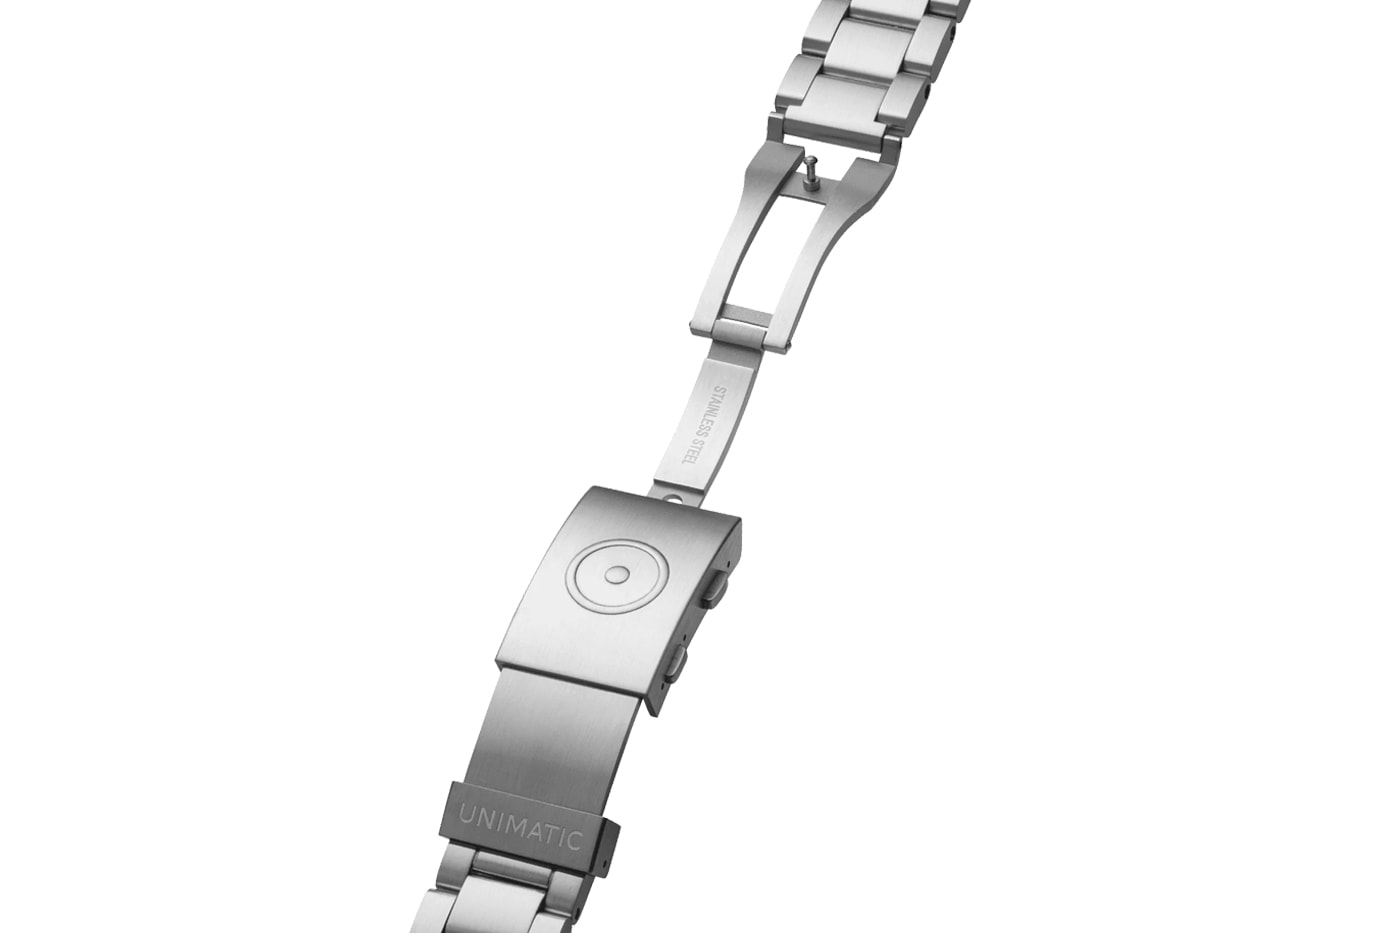 Unimatic Solid Steel Bracelets For Watches Release Info